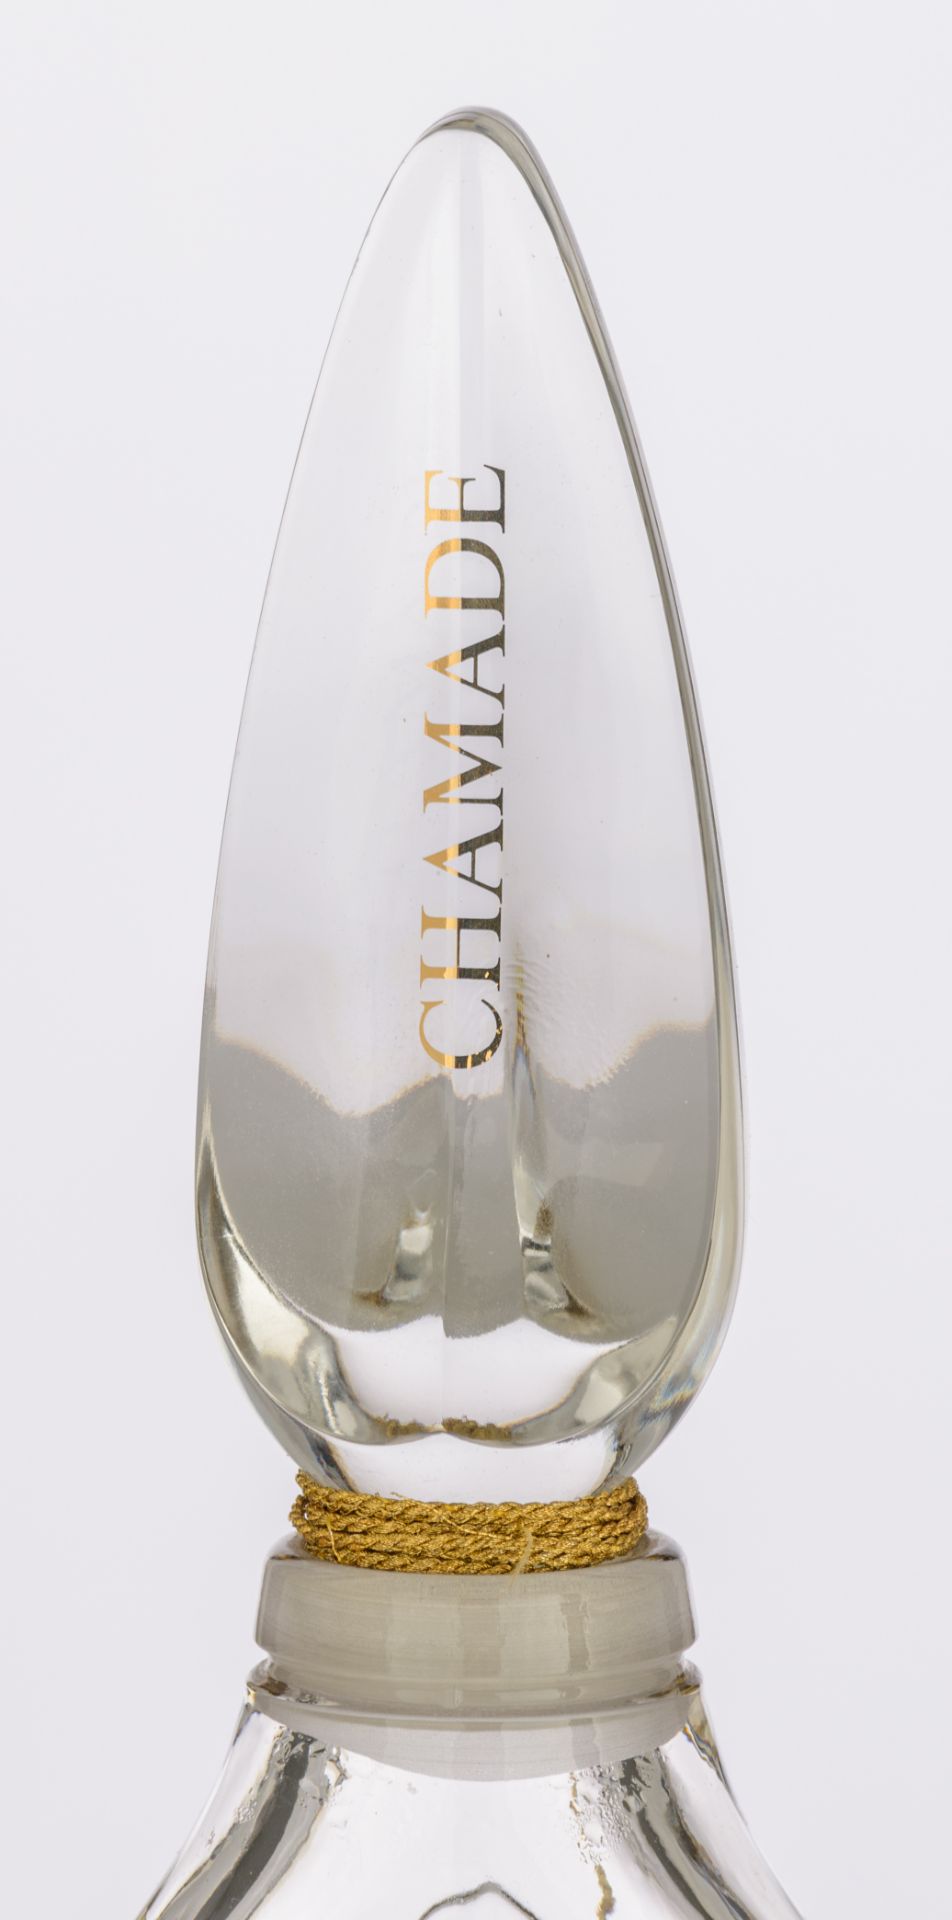 Three large perfume factice display bottles: Chamade, Shalimar and Misouko by Guerlain, H 30 - 38 - - Image 11 of 11